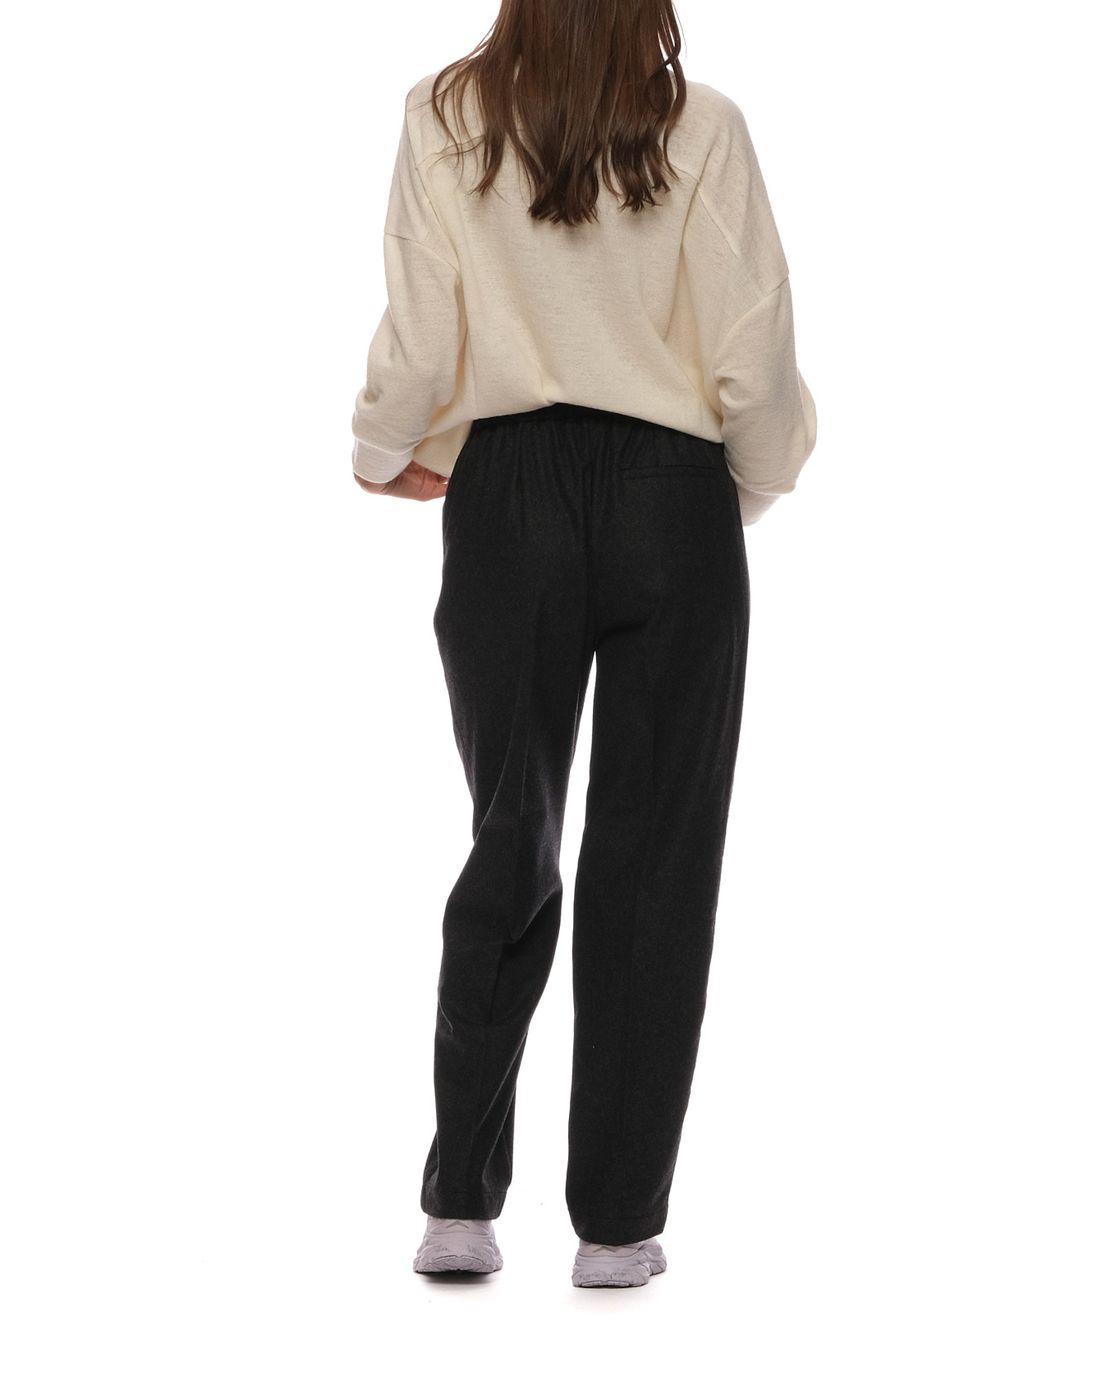 Pants woman 9627 MY PANTS ANTRACITE FORTE_FORTE